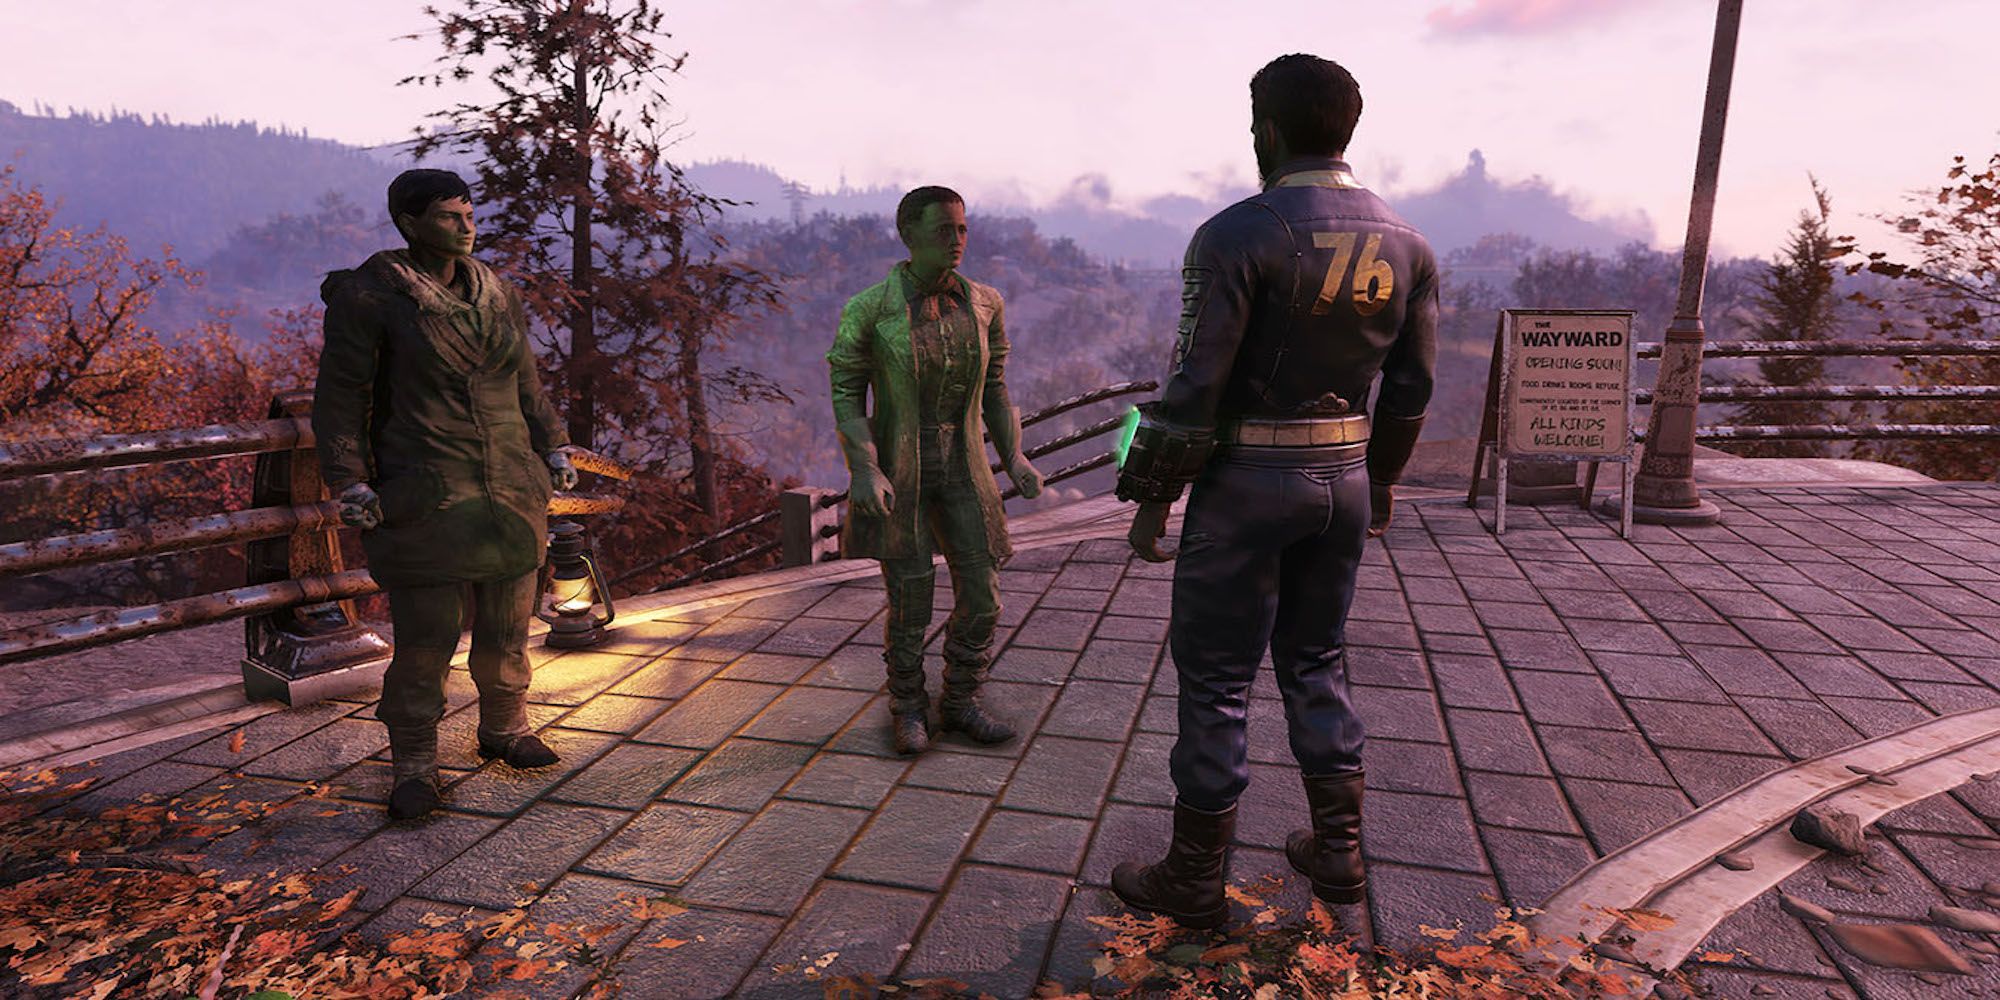 A cutscene featuring characters in Fallout 76